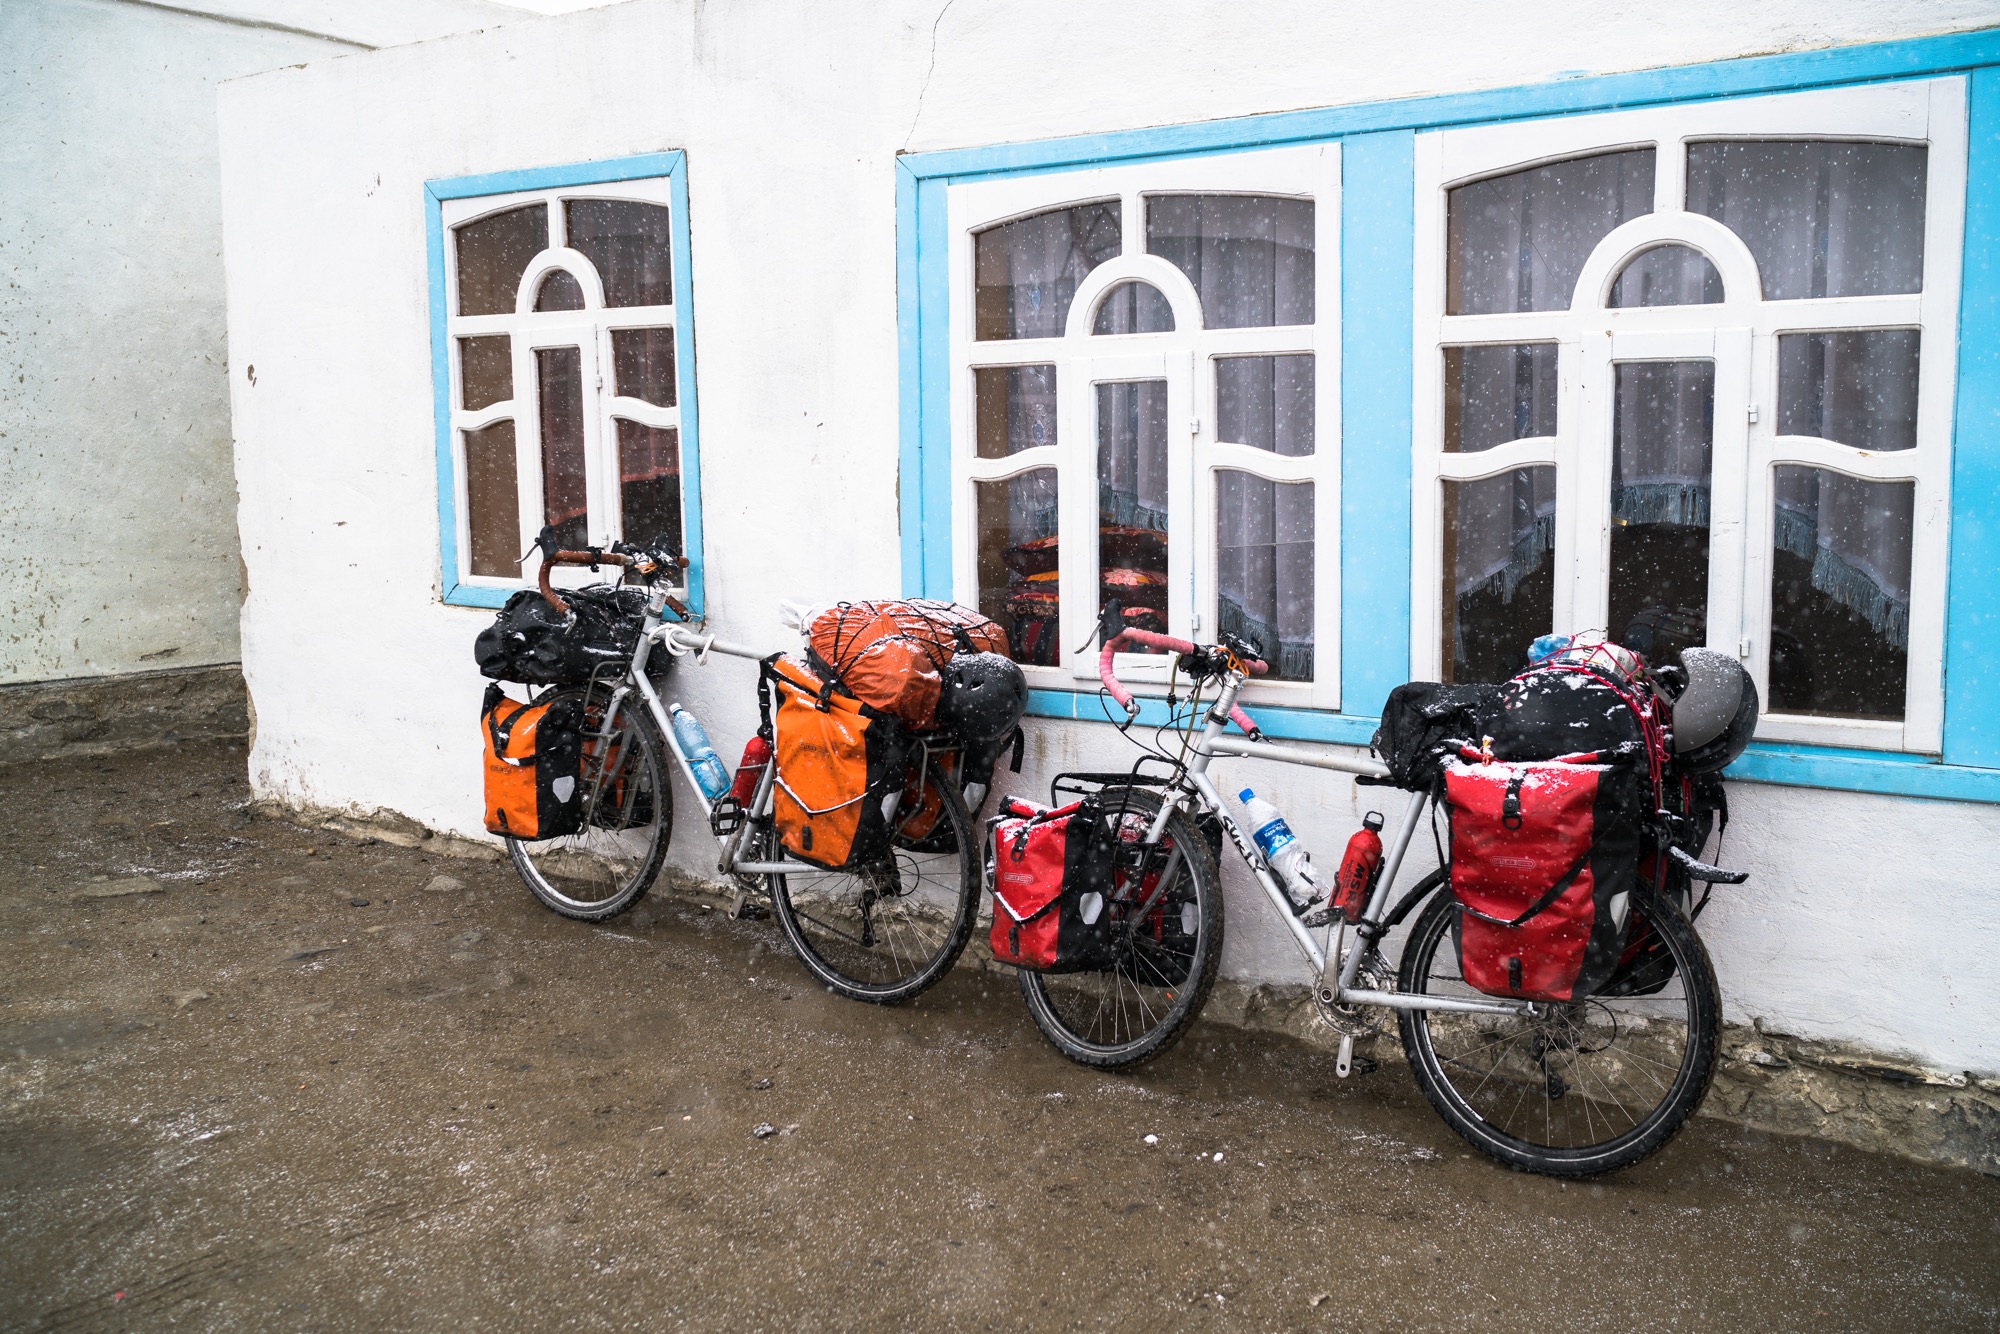 Our bikes outside the guesthouse